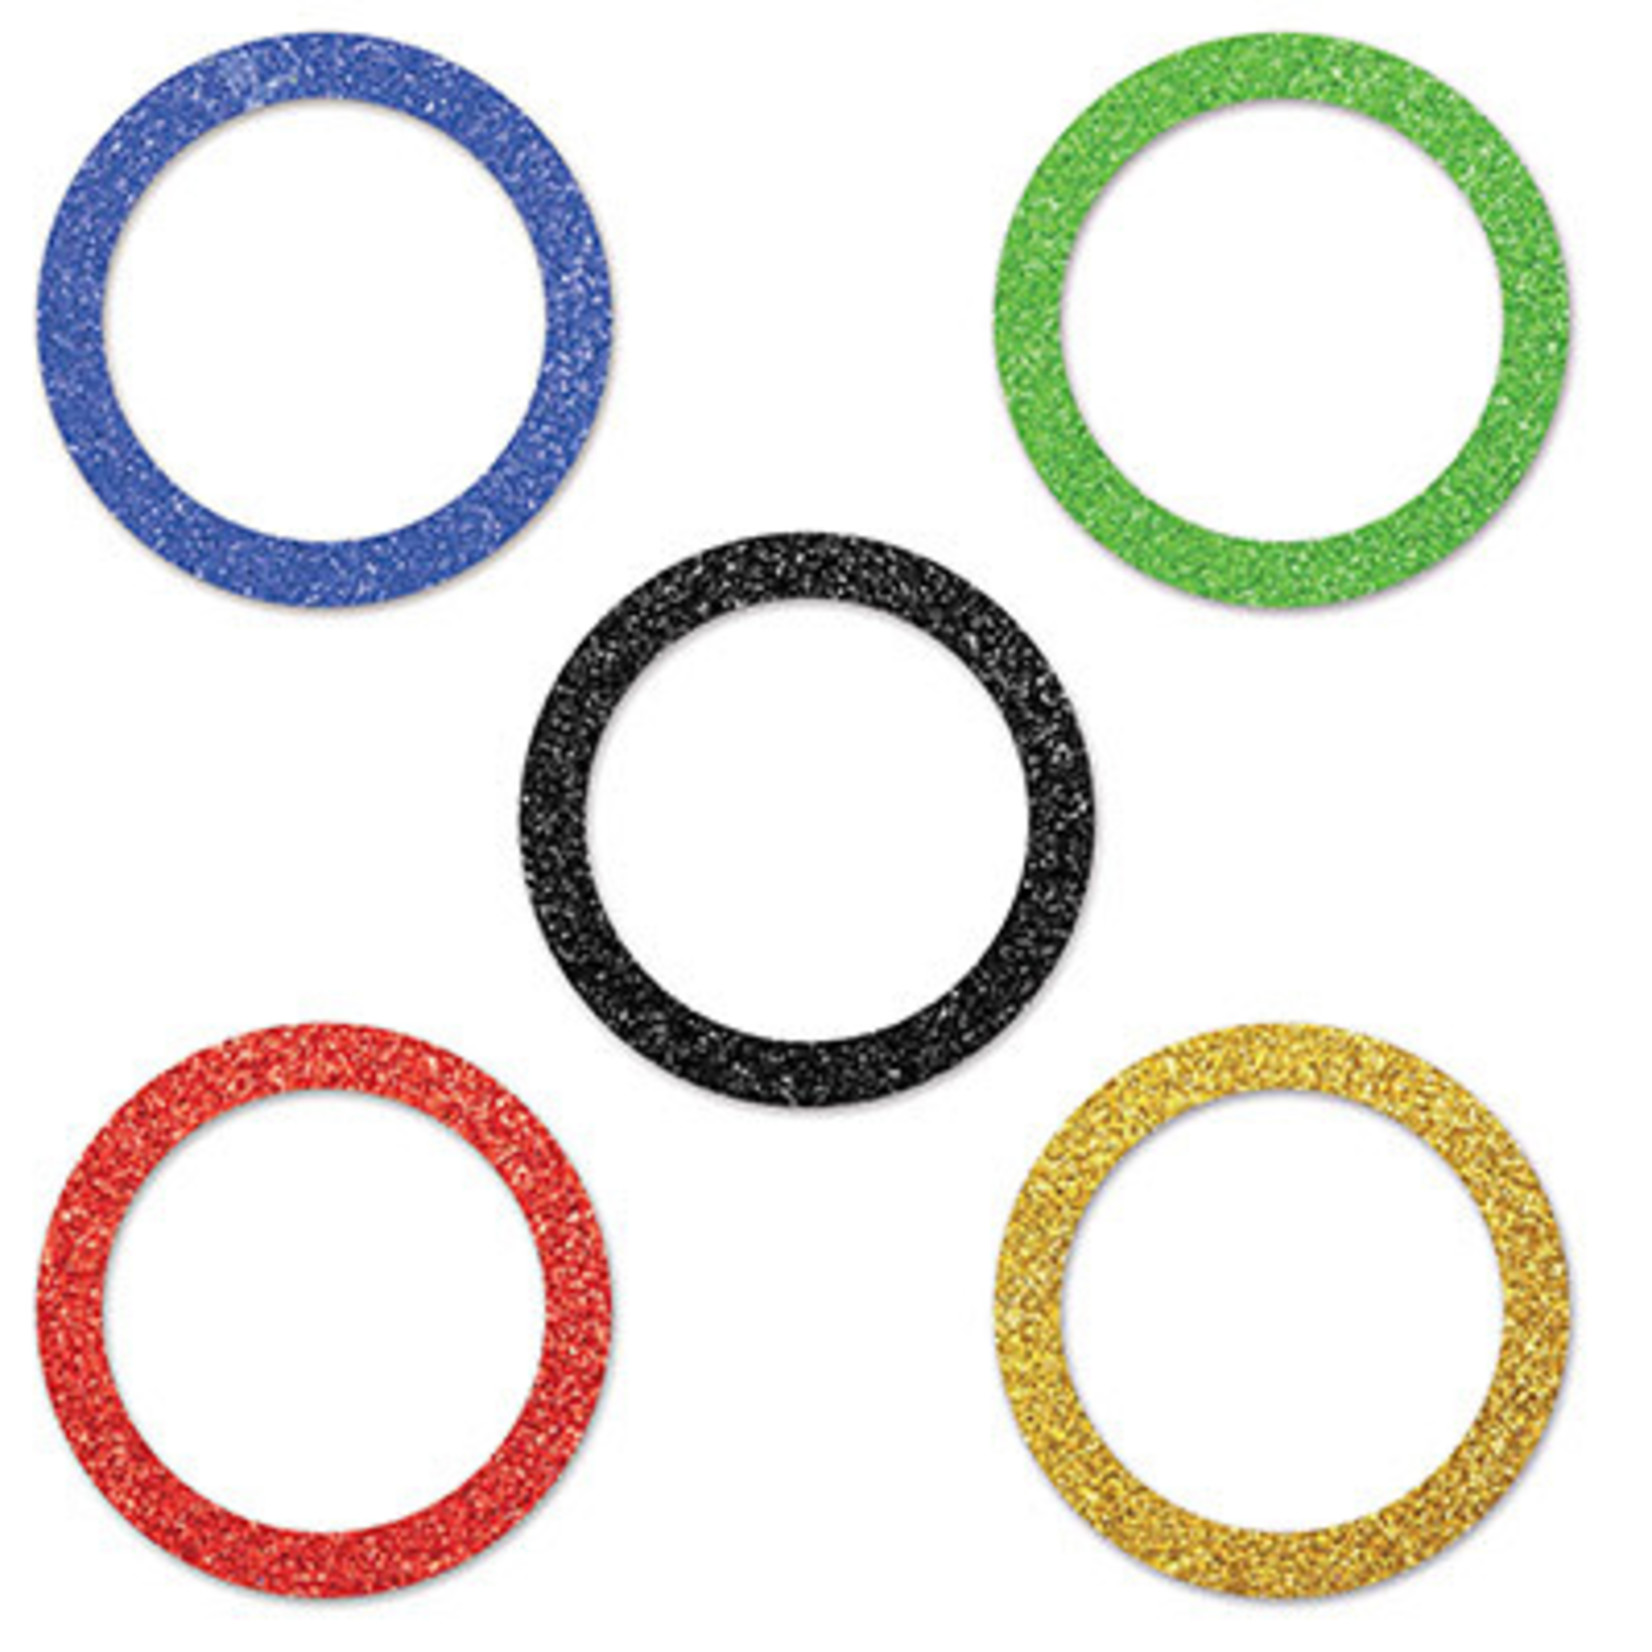 Beistle Olympic Party 2" Rings